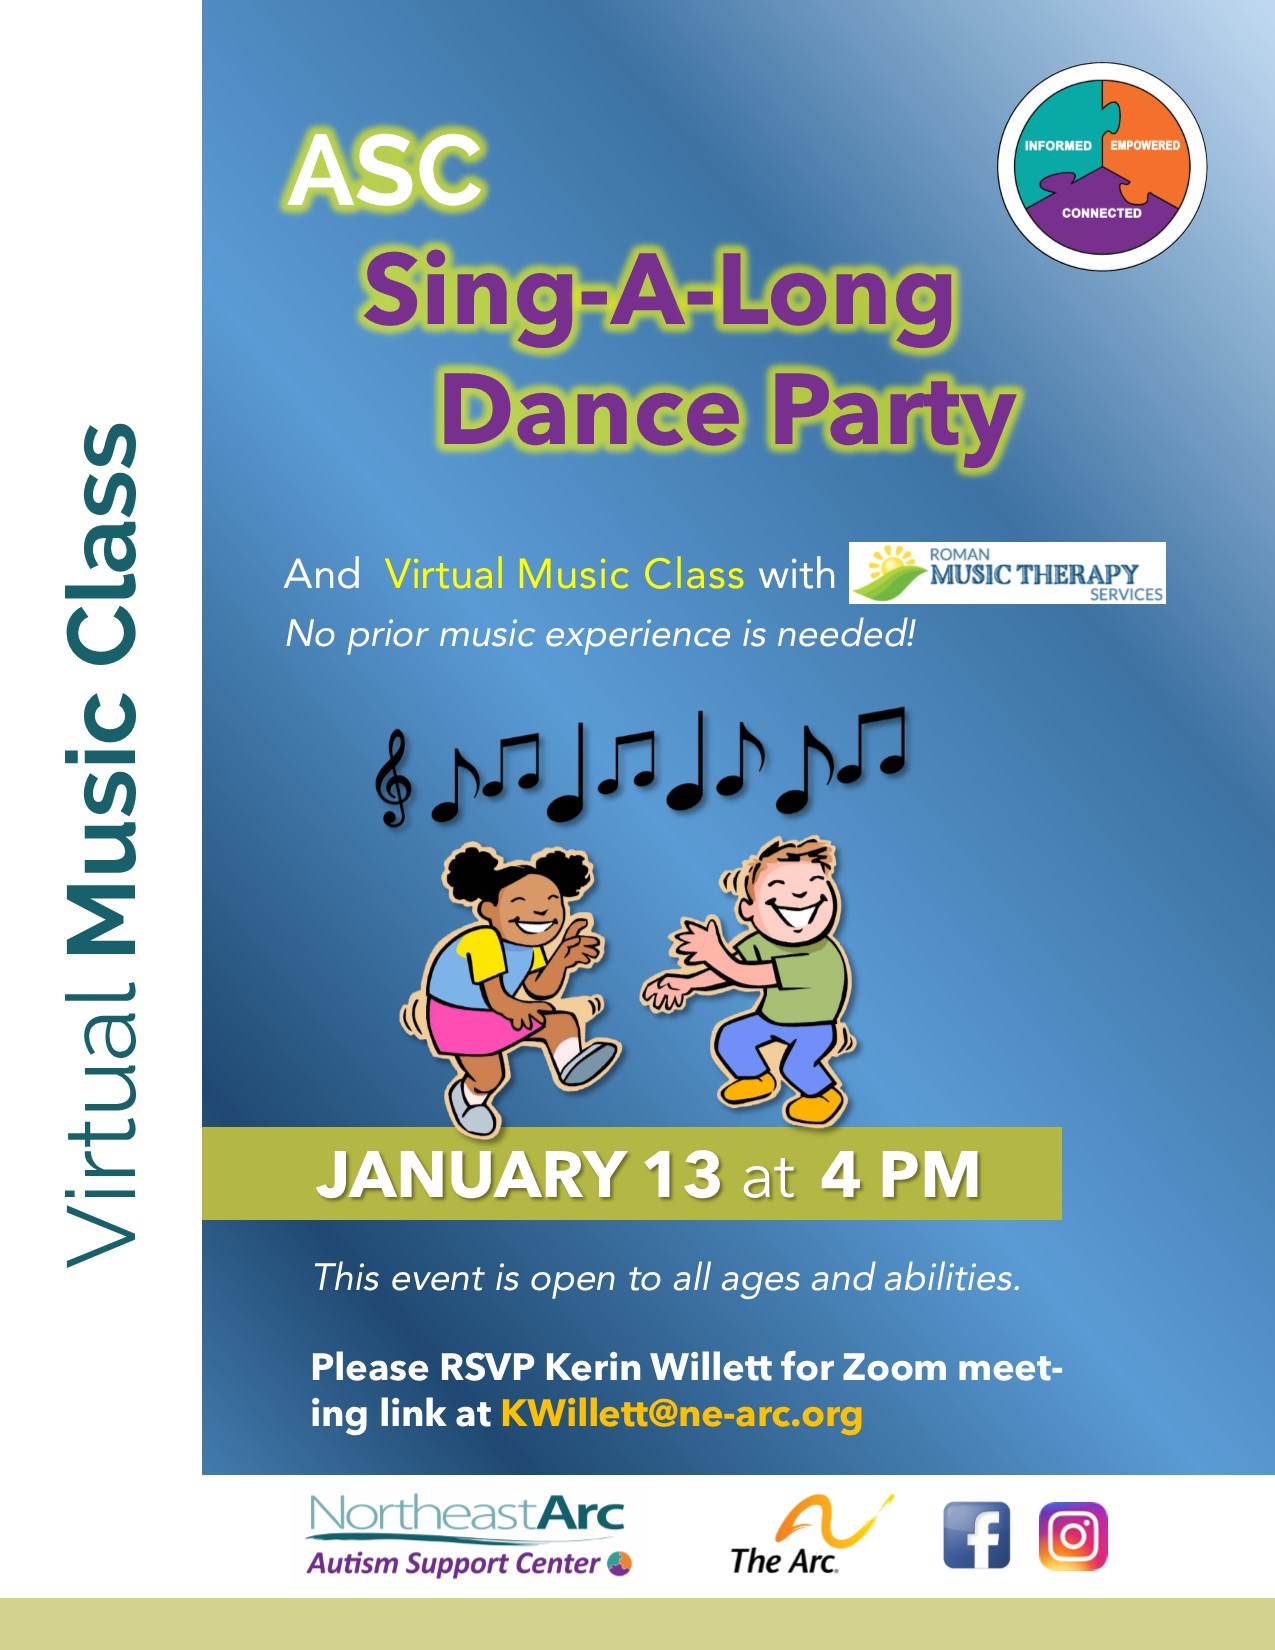 Flyer for Fun Family Event - Sing-A-Long Dance Party with Roman Music Therapy